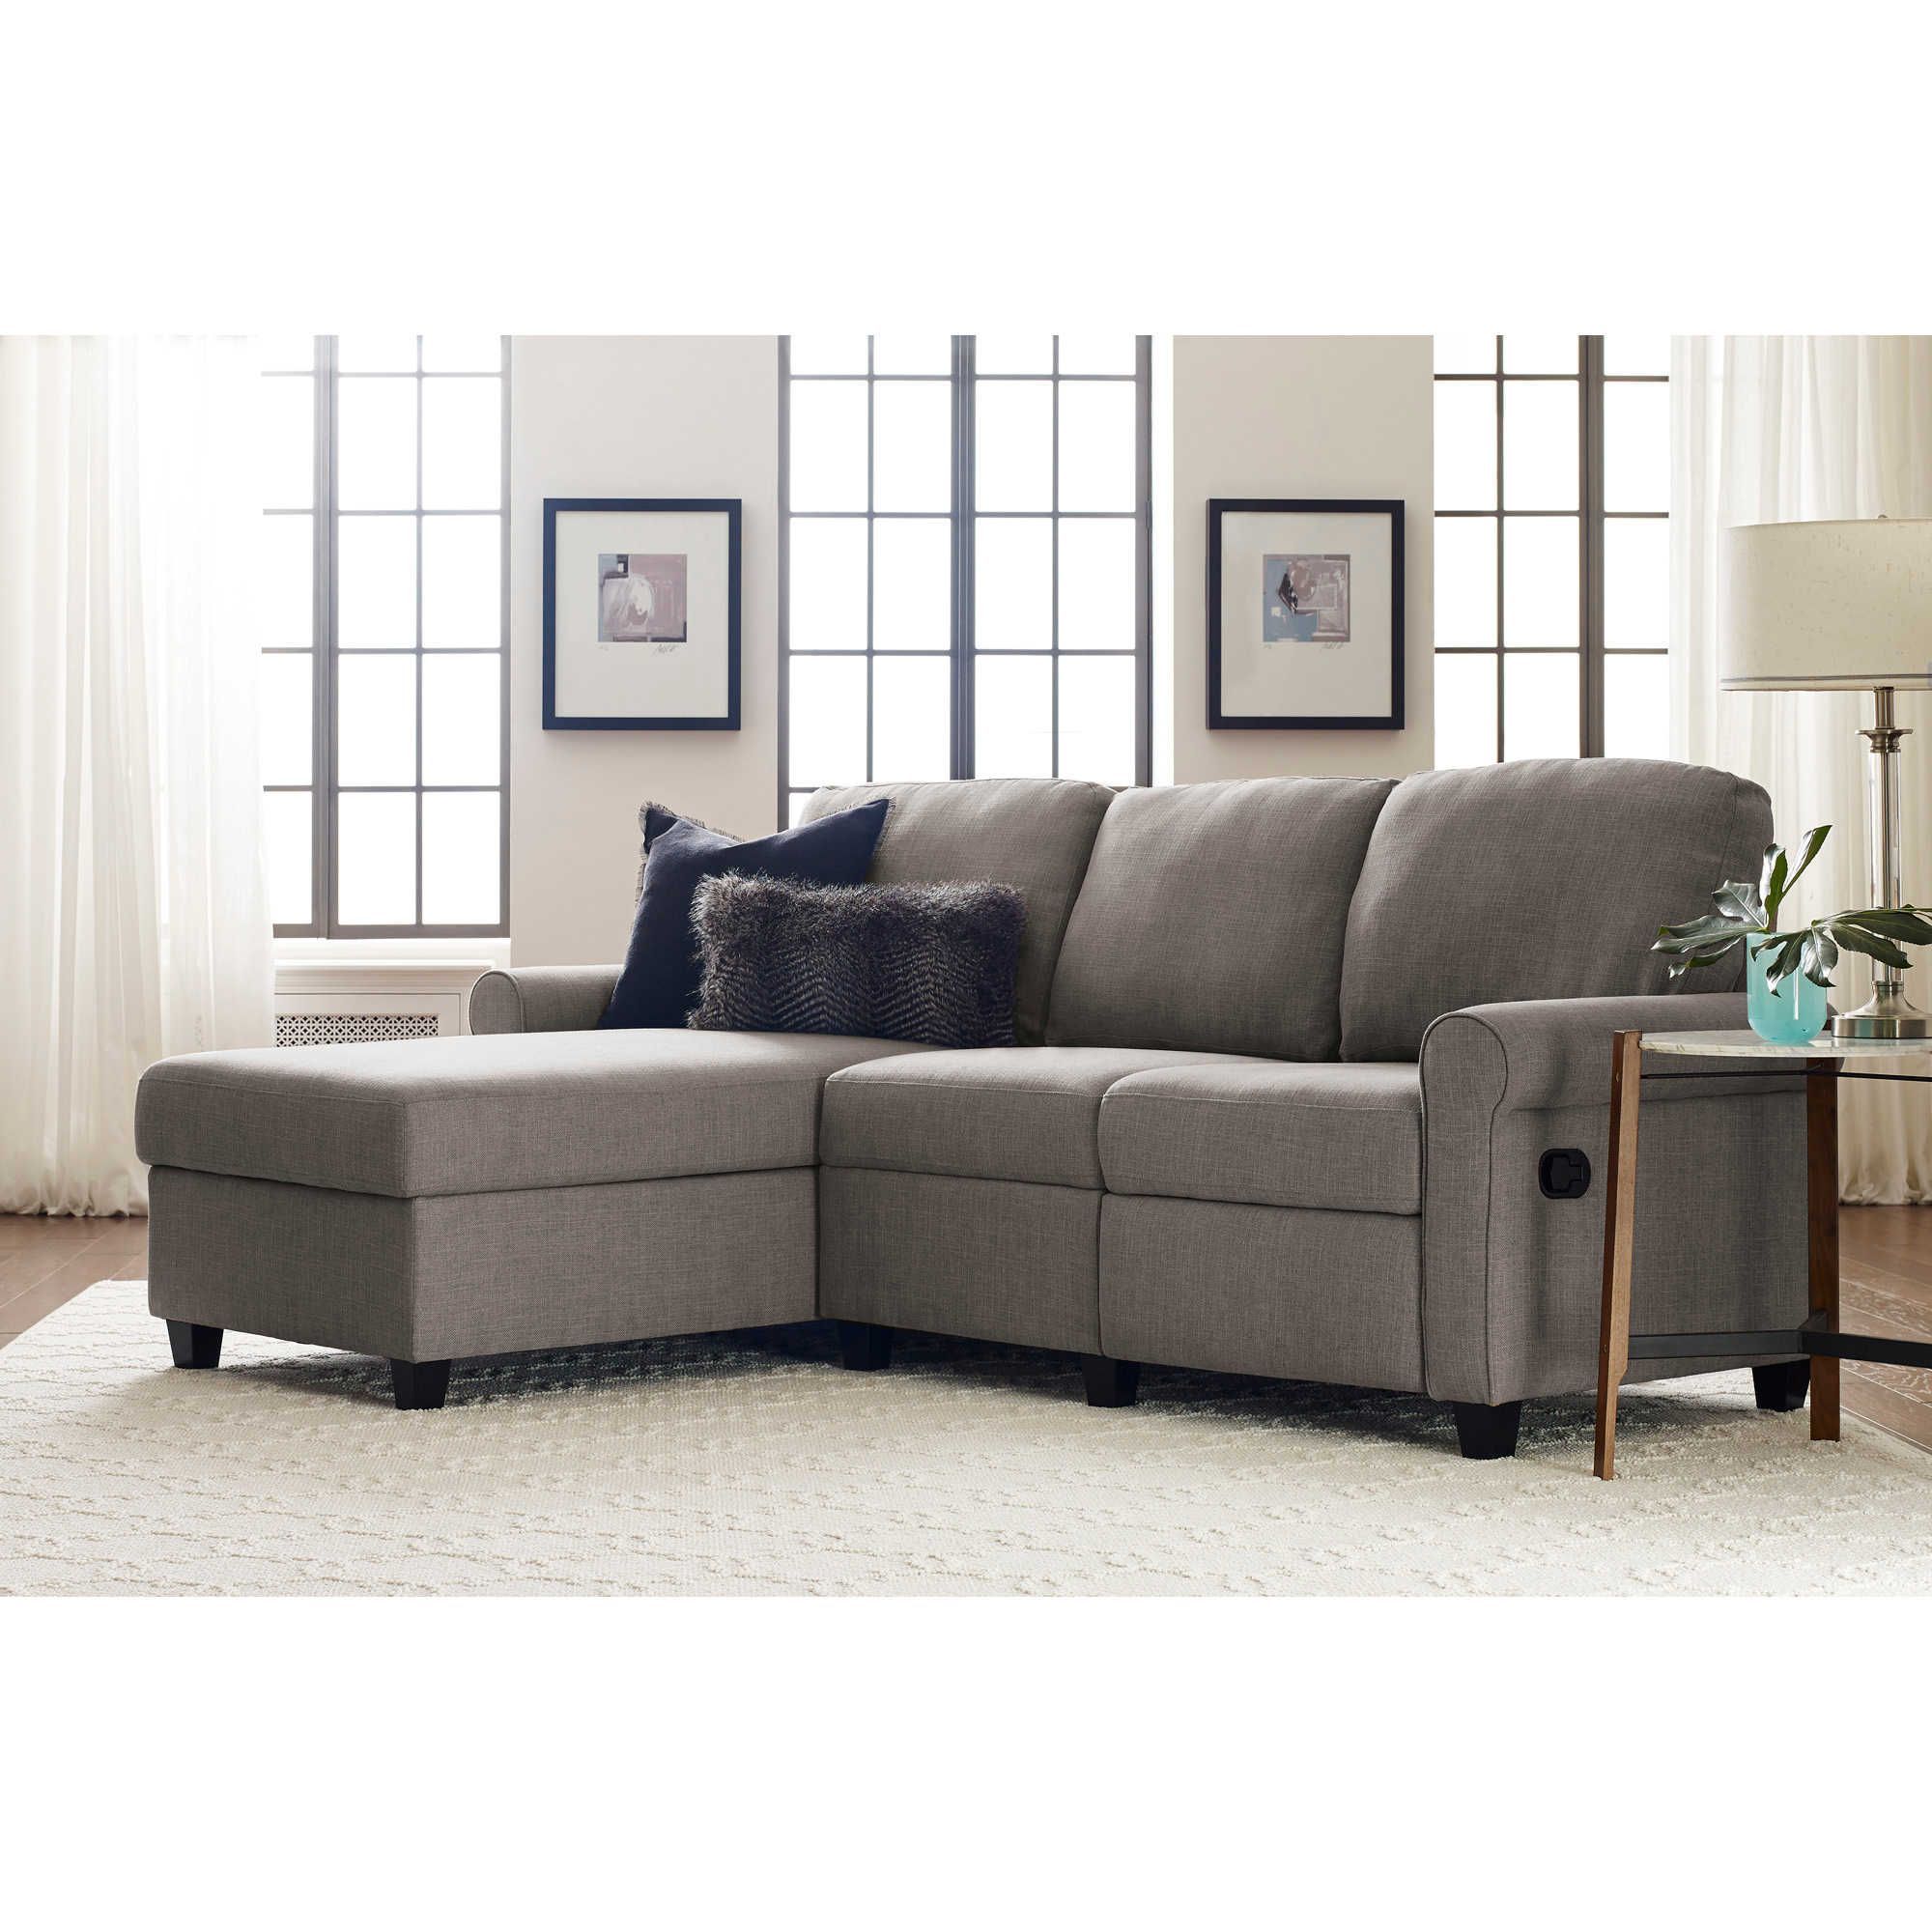 Featured Photo of 15 Best Copenhagen Reclining Sectional Sofas with Right Storage Chaise